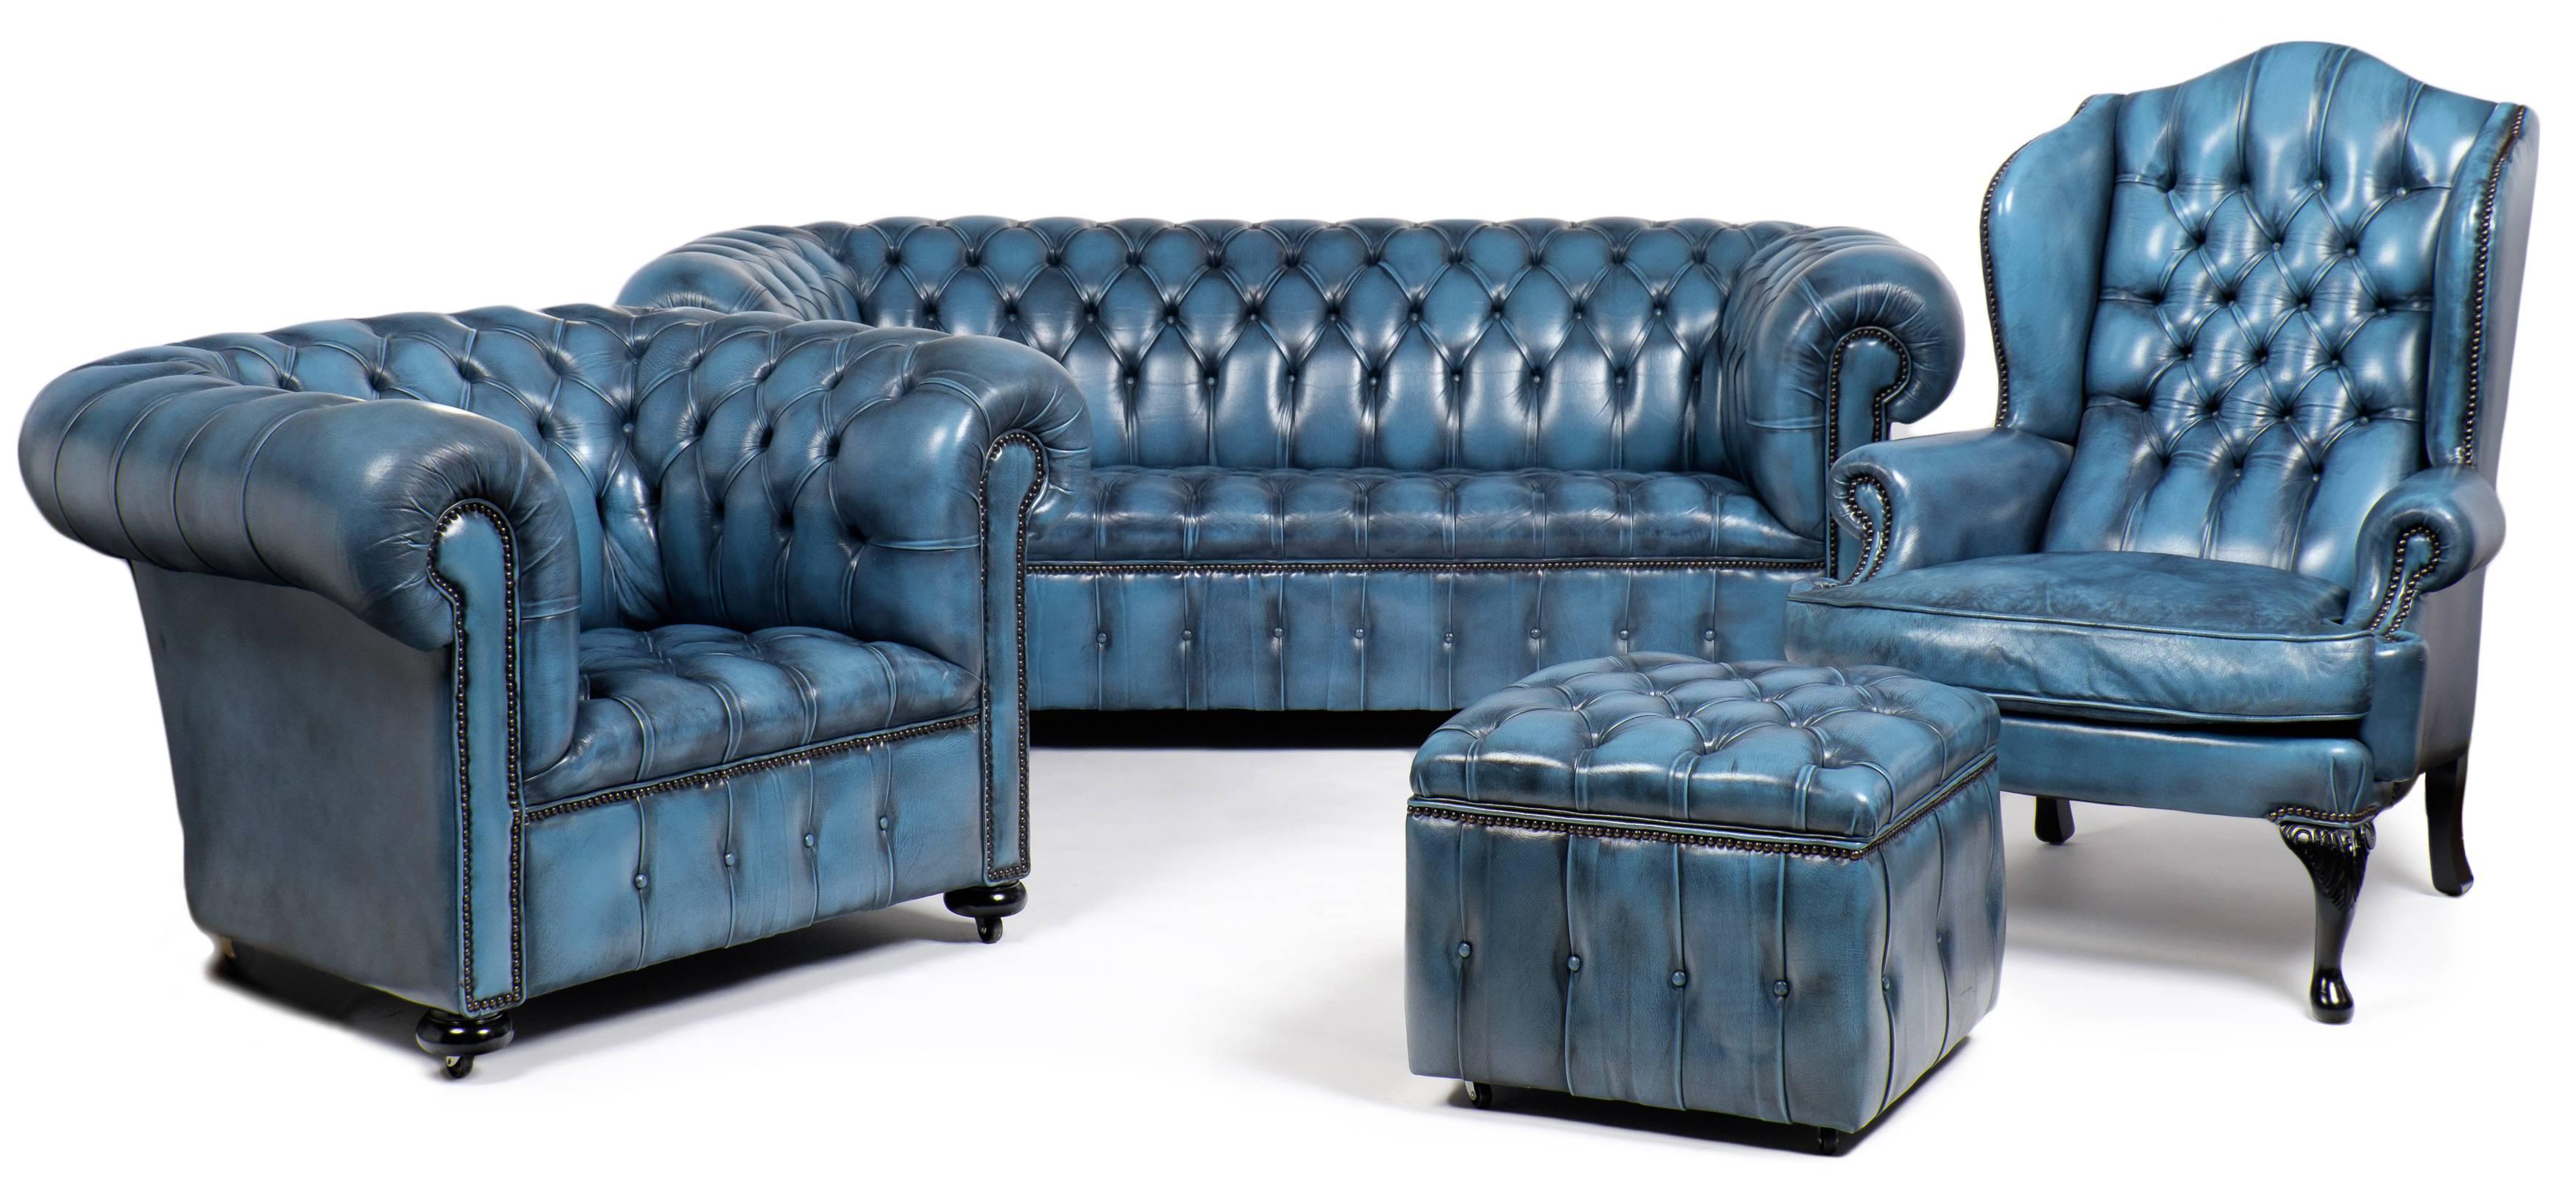 English vintage Chesterfield club chair with steel blue tufted leather upholstery and bronze nailheads, ebonized bun feet on casters.

See the matching sofa, wingback armchair and storage ottoman for the complete set!